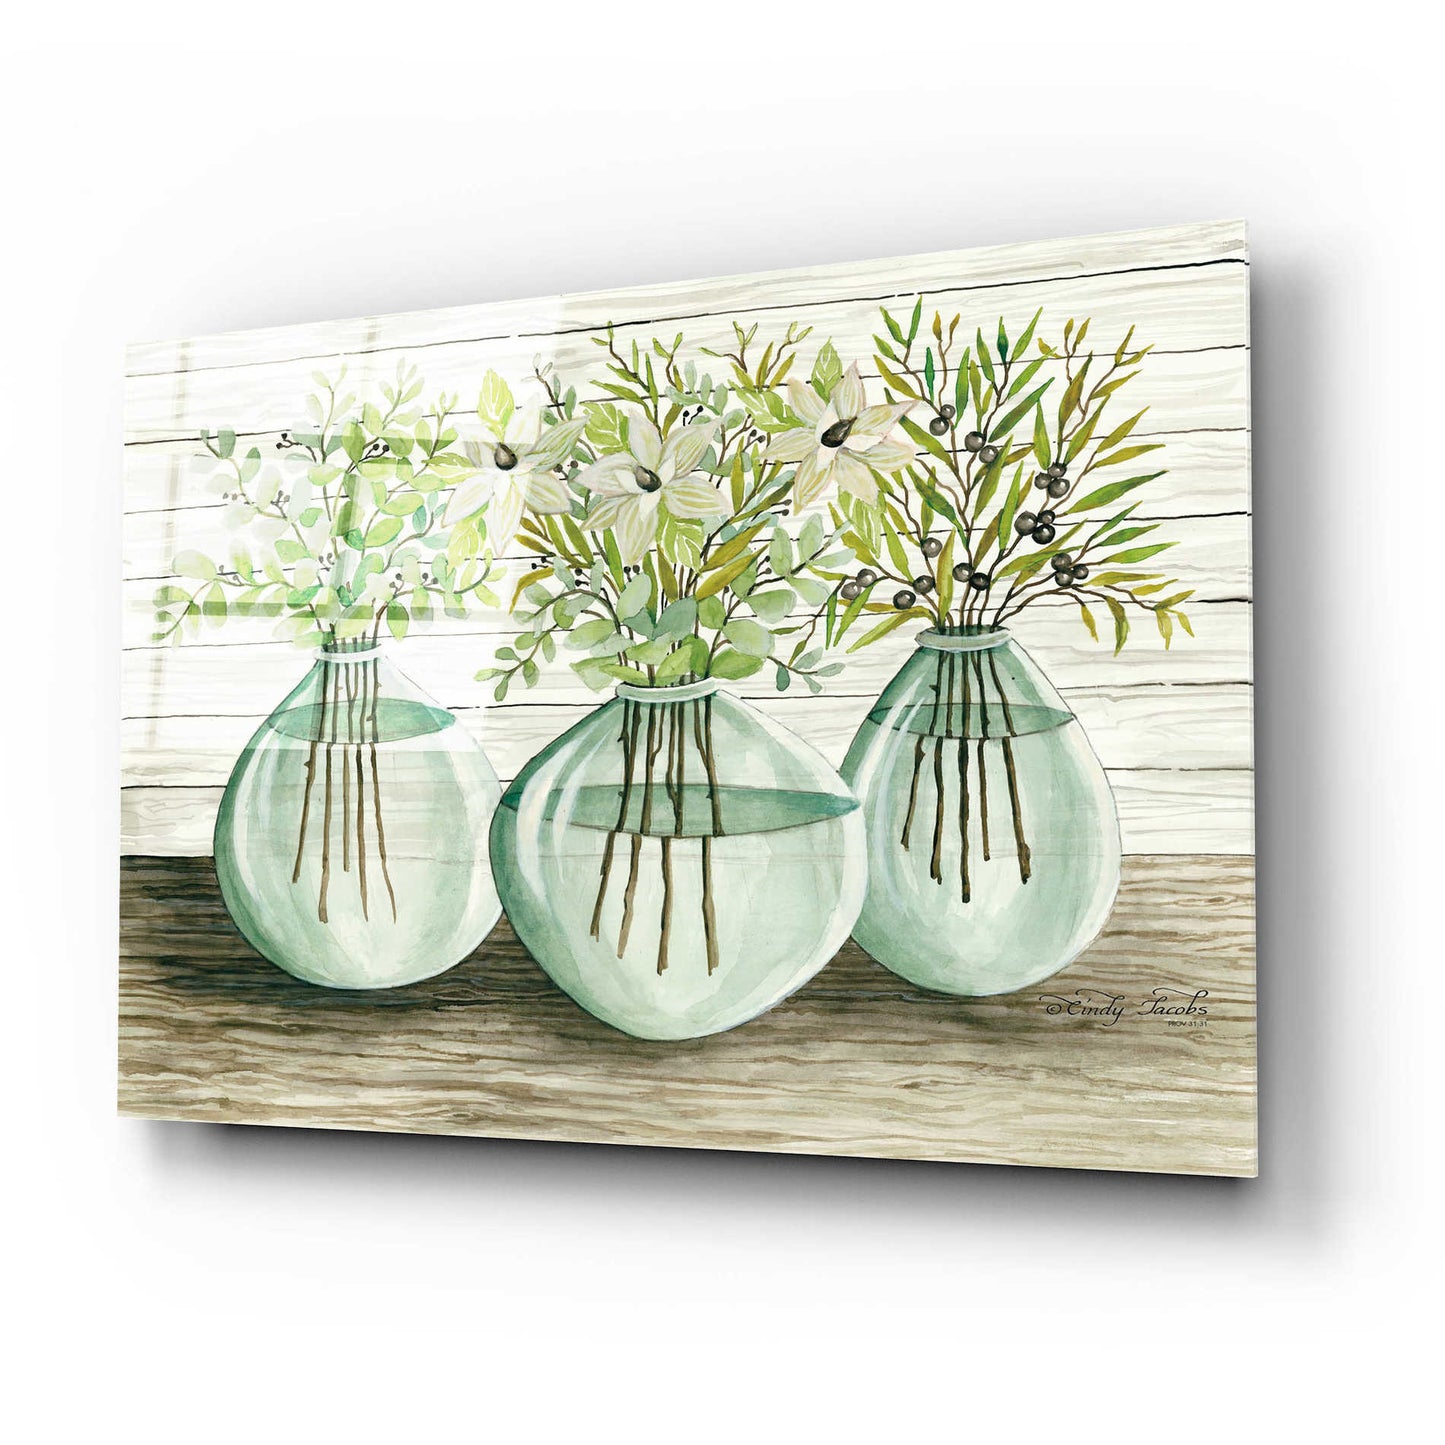 Epic Art 'Eucalyptus in Glass Vases' by Cindy Jacobs, Acrylic Glass Wall Art,24x16